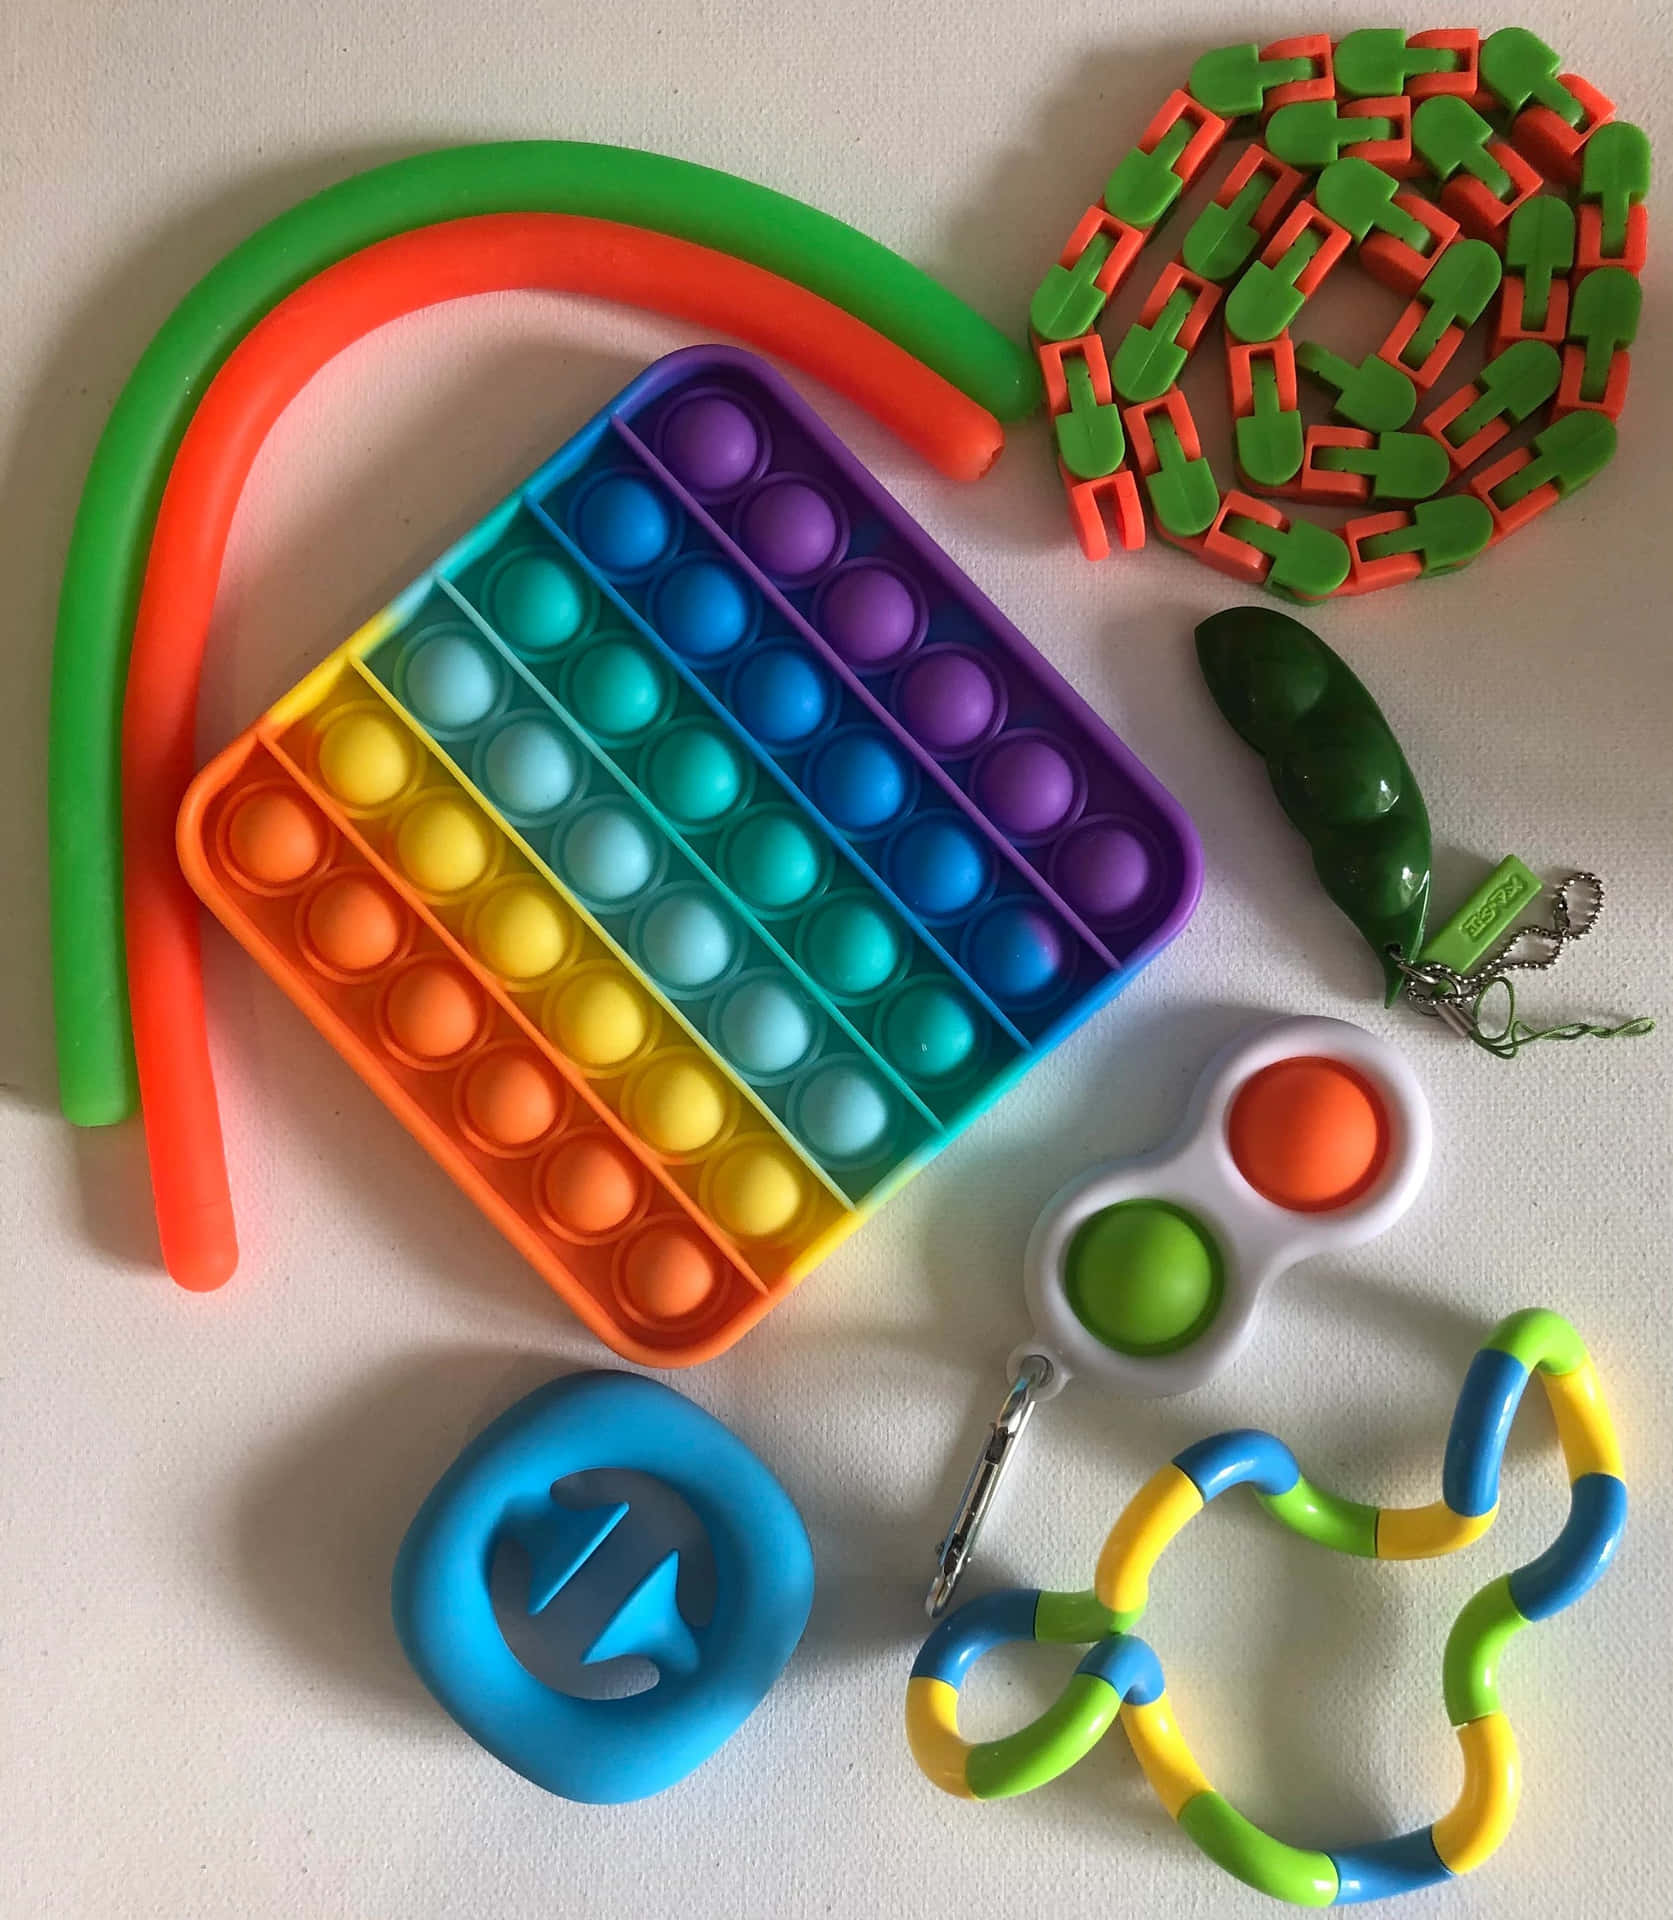 A Colorful Set Of Toys And A Plastic Toy